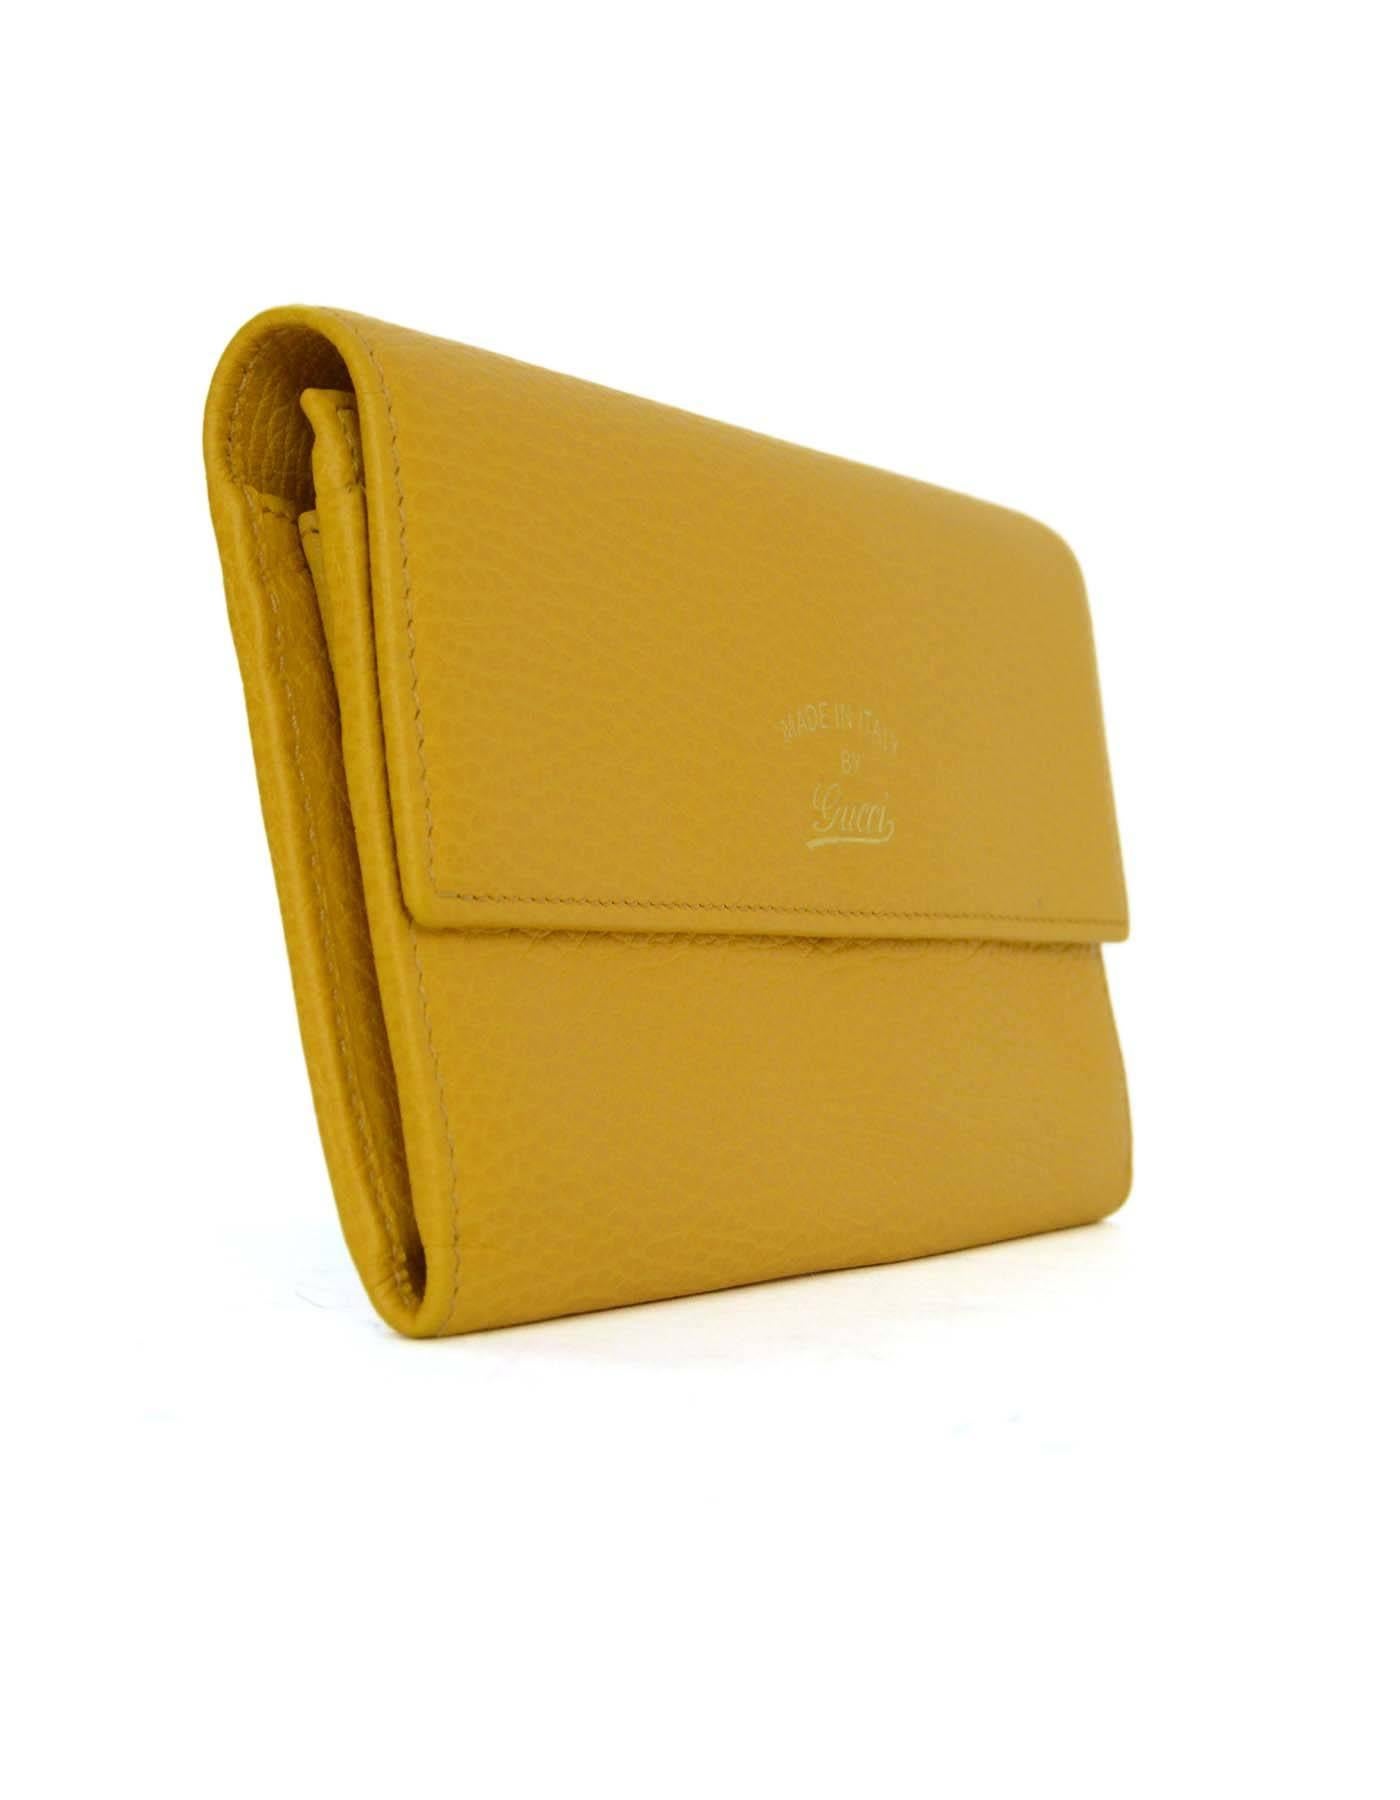 Gucci Yellow Swing Leather Continental Flap Wallet 
Features 'Made in Italy by Gucci' stamped on flap top in gold
Made In: Italy
Color: Yellow
Hardware: Goldtone
Materials: Leather
Lining: Yellow leather
Closure/Opening: Flap top with snap